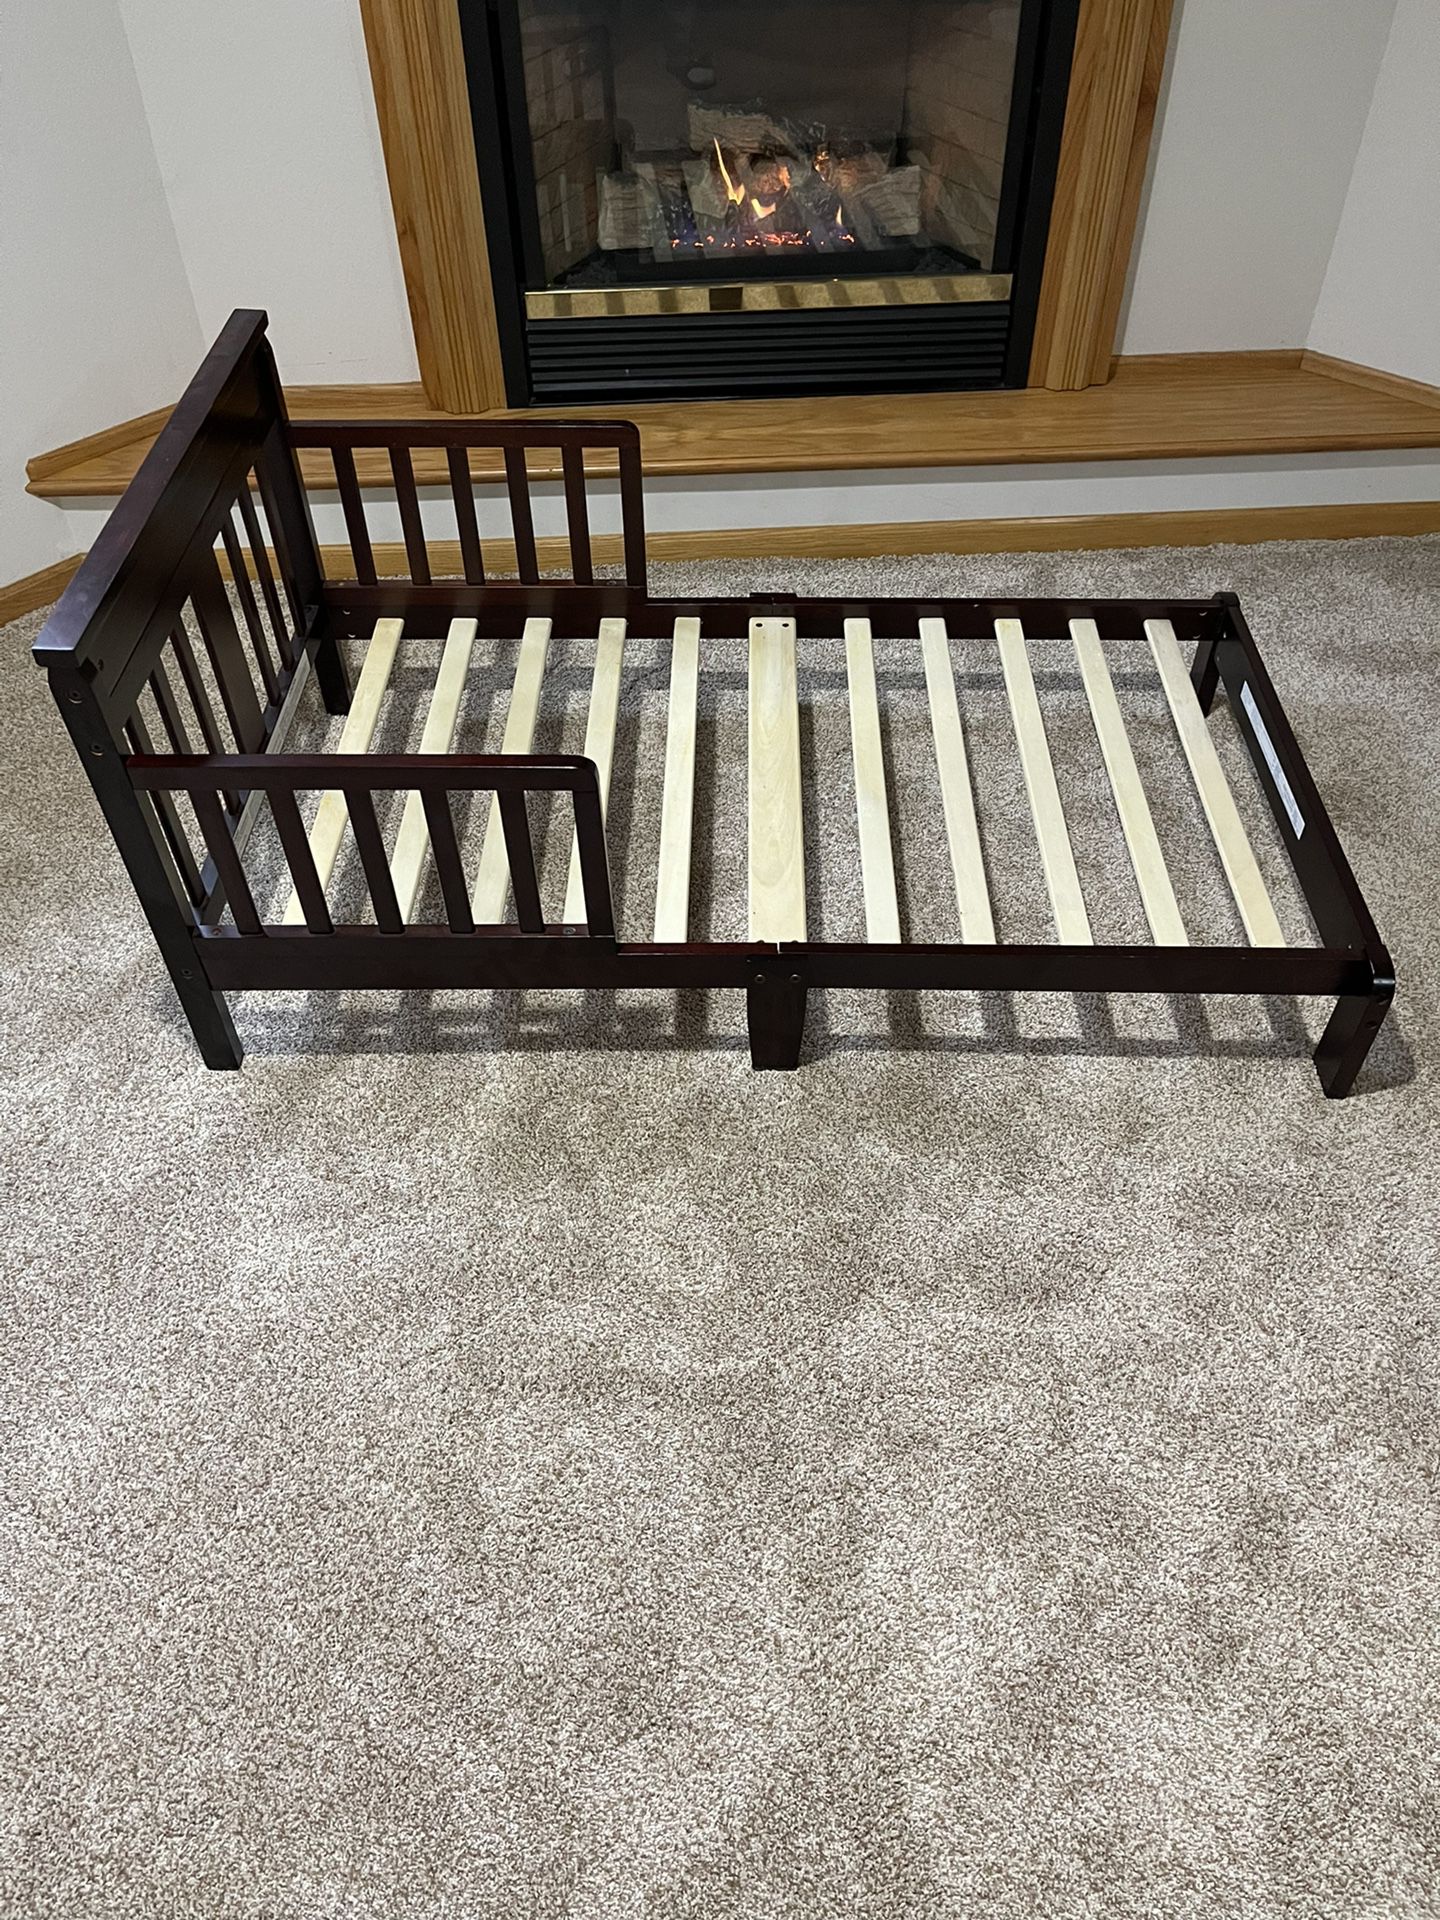 Toddler bed without mattress